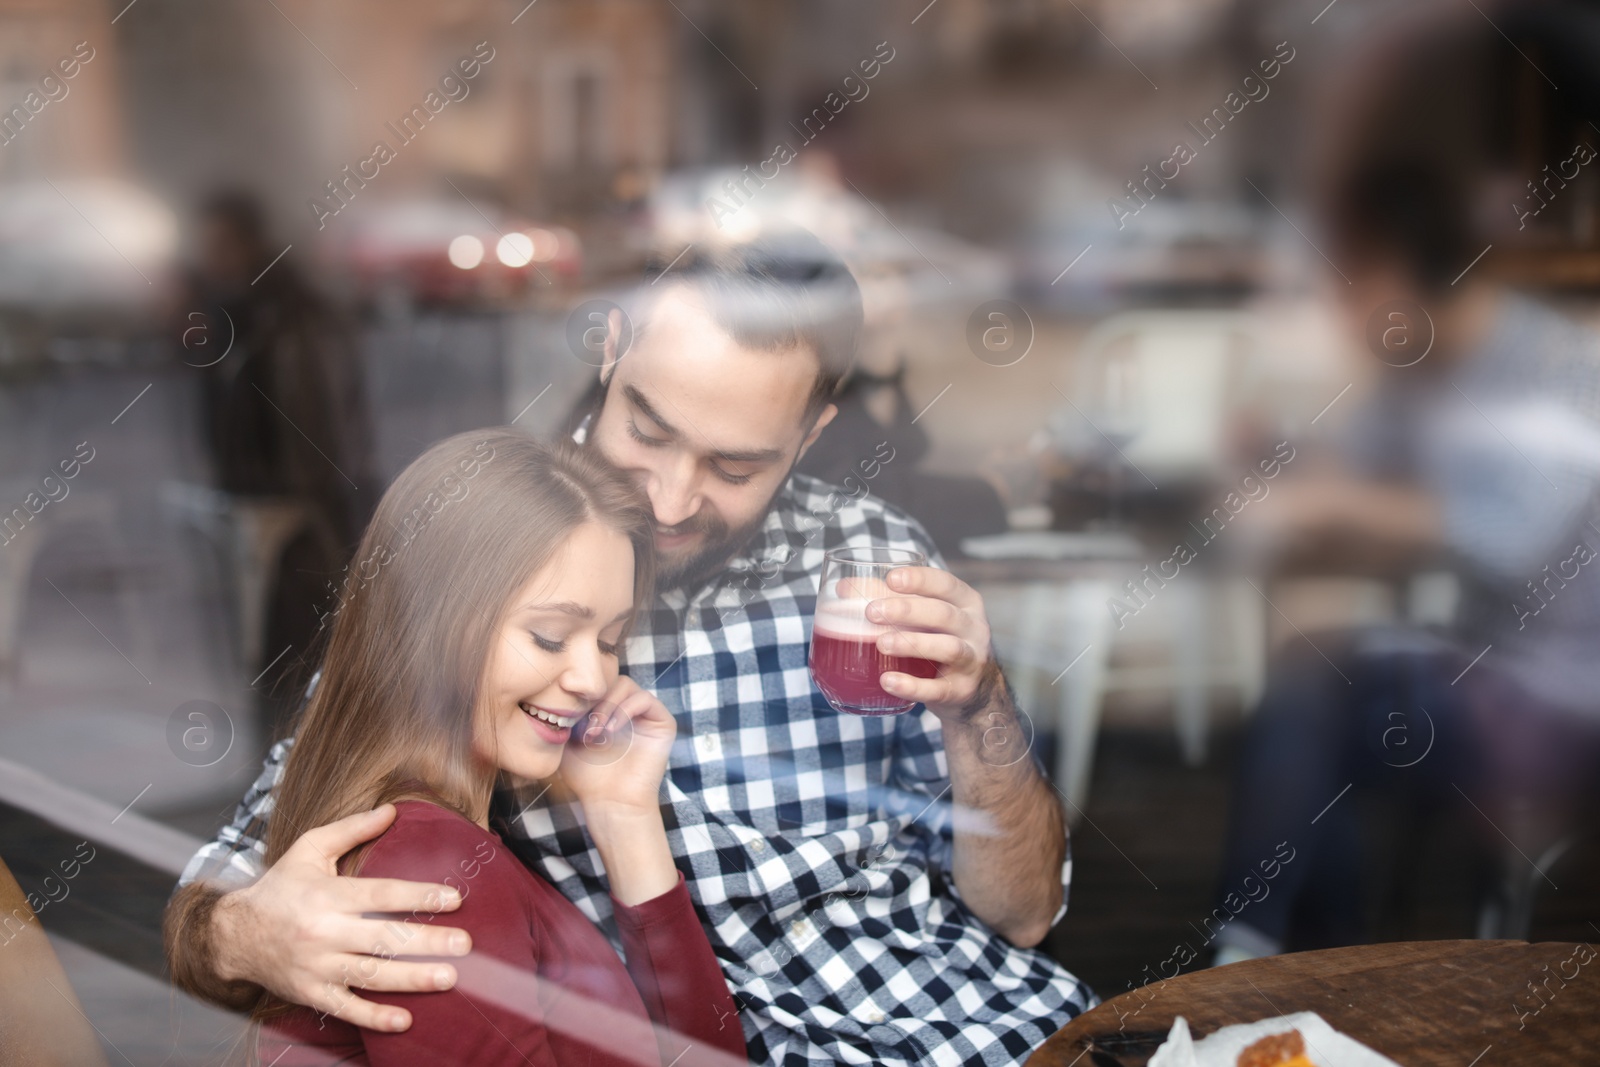 Photo of Lovely young couple spending time together in cafe, view from outdoors through window